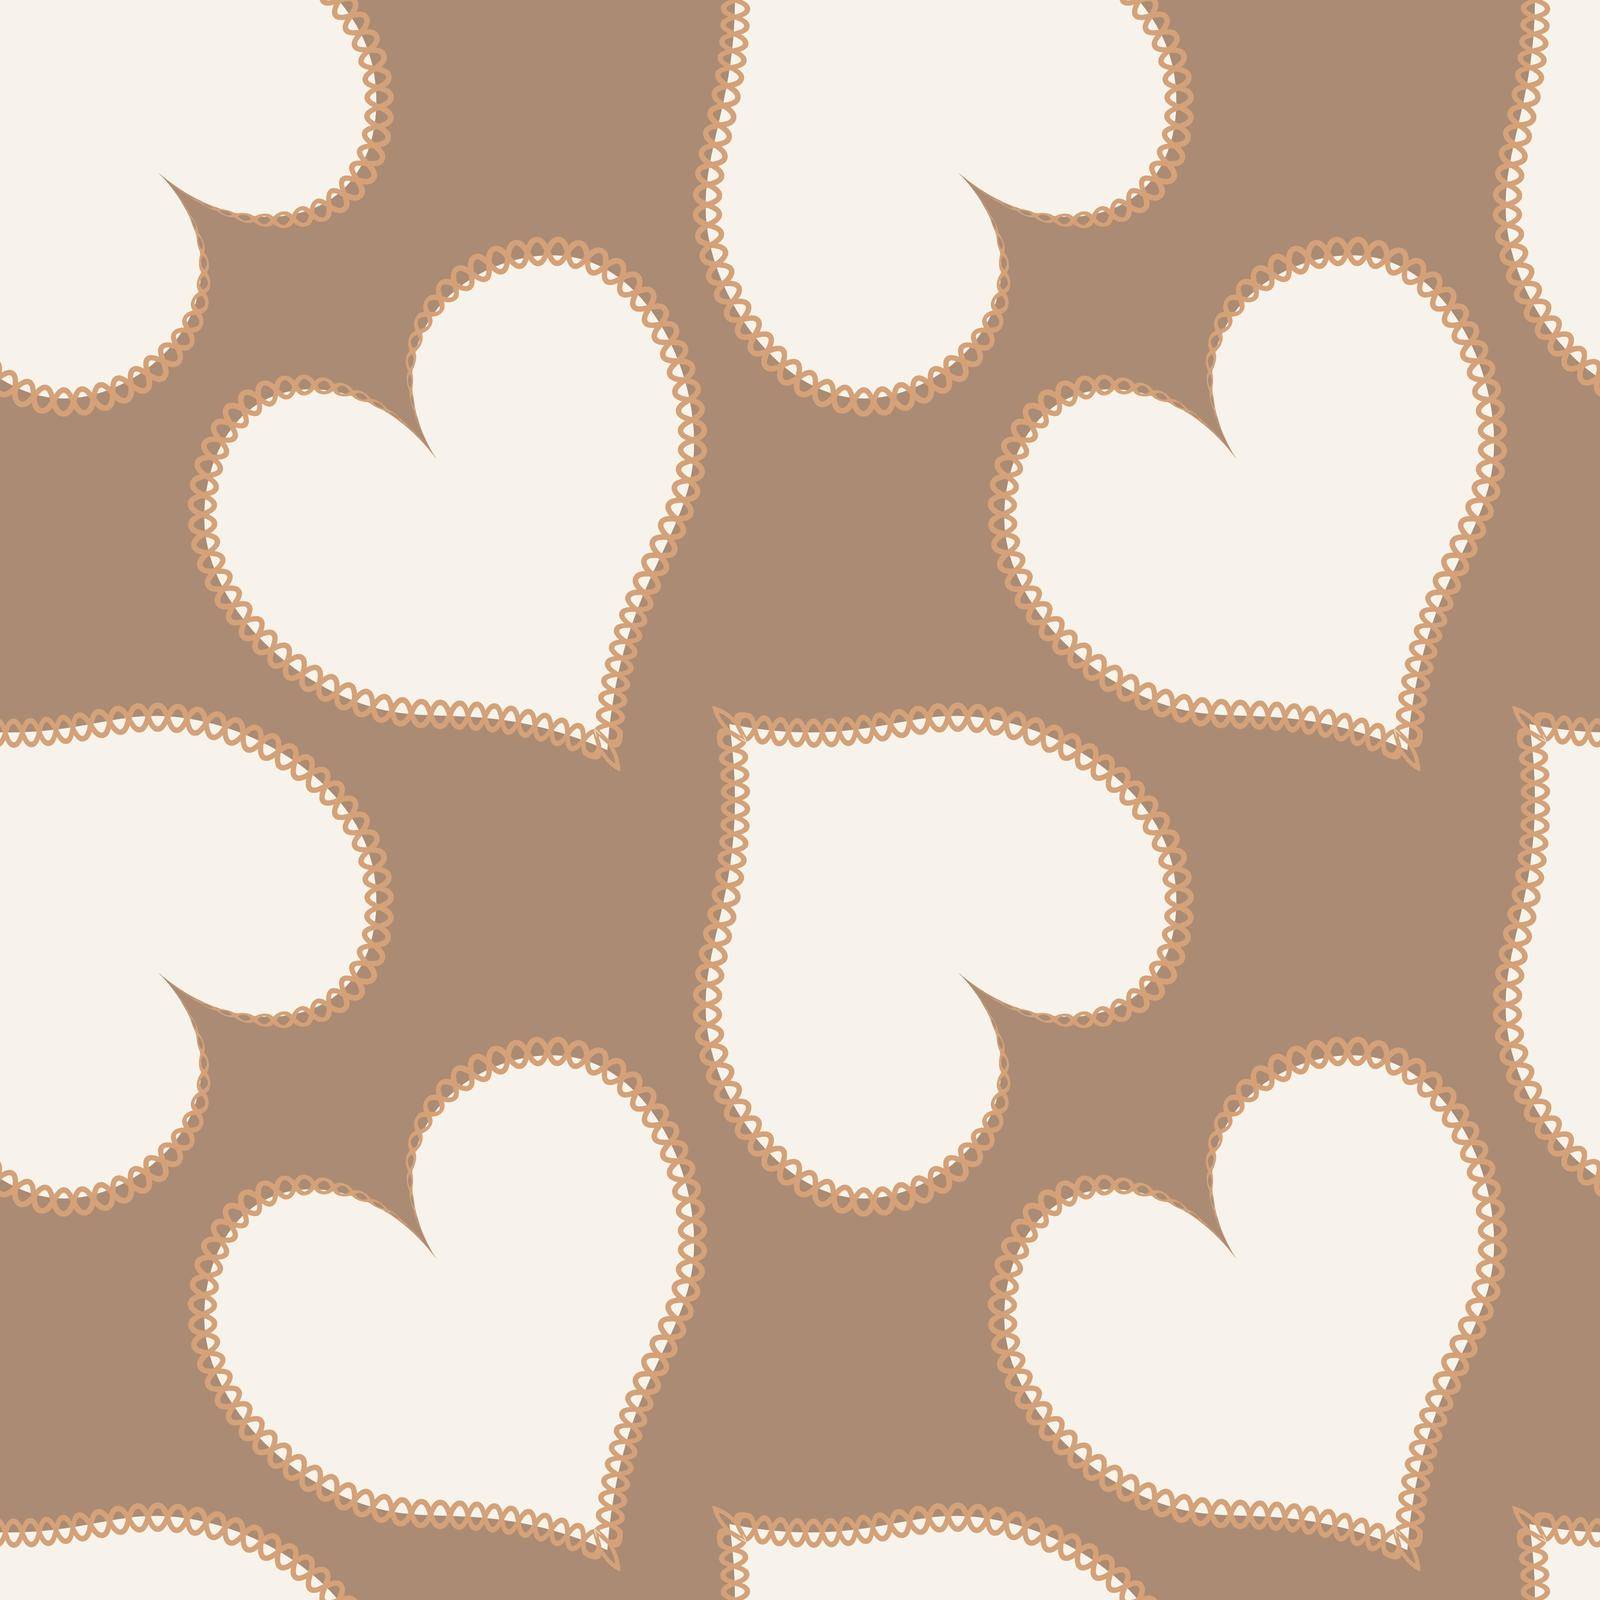 Illustration - Seamless pattern on a square background - hearts made of fabric, patchwork sewing. Design element of books, notebooks, postcards, interior items. Wallpapers, textiles, packaging, background for a website, mobile application or blog. love, valentine, lovers, holiday, textiles, patchwork, patchwork